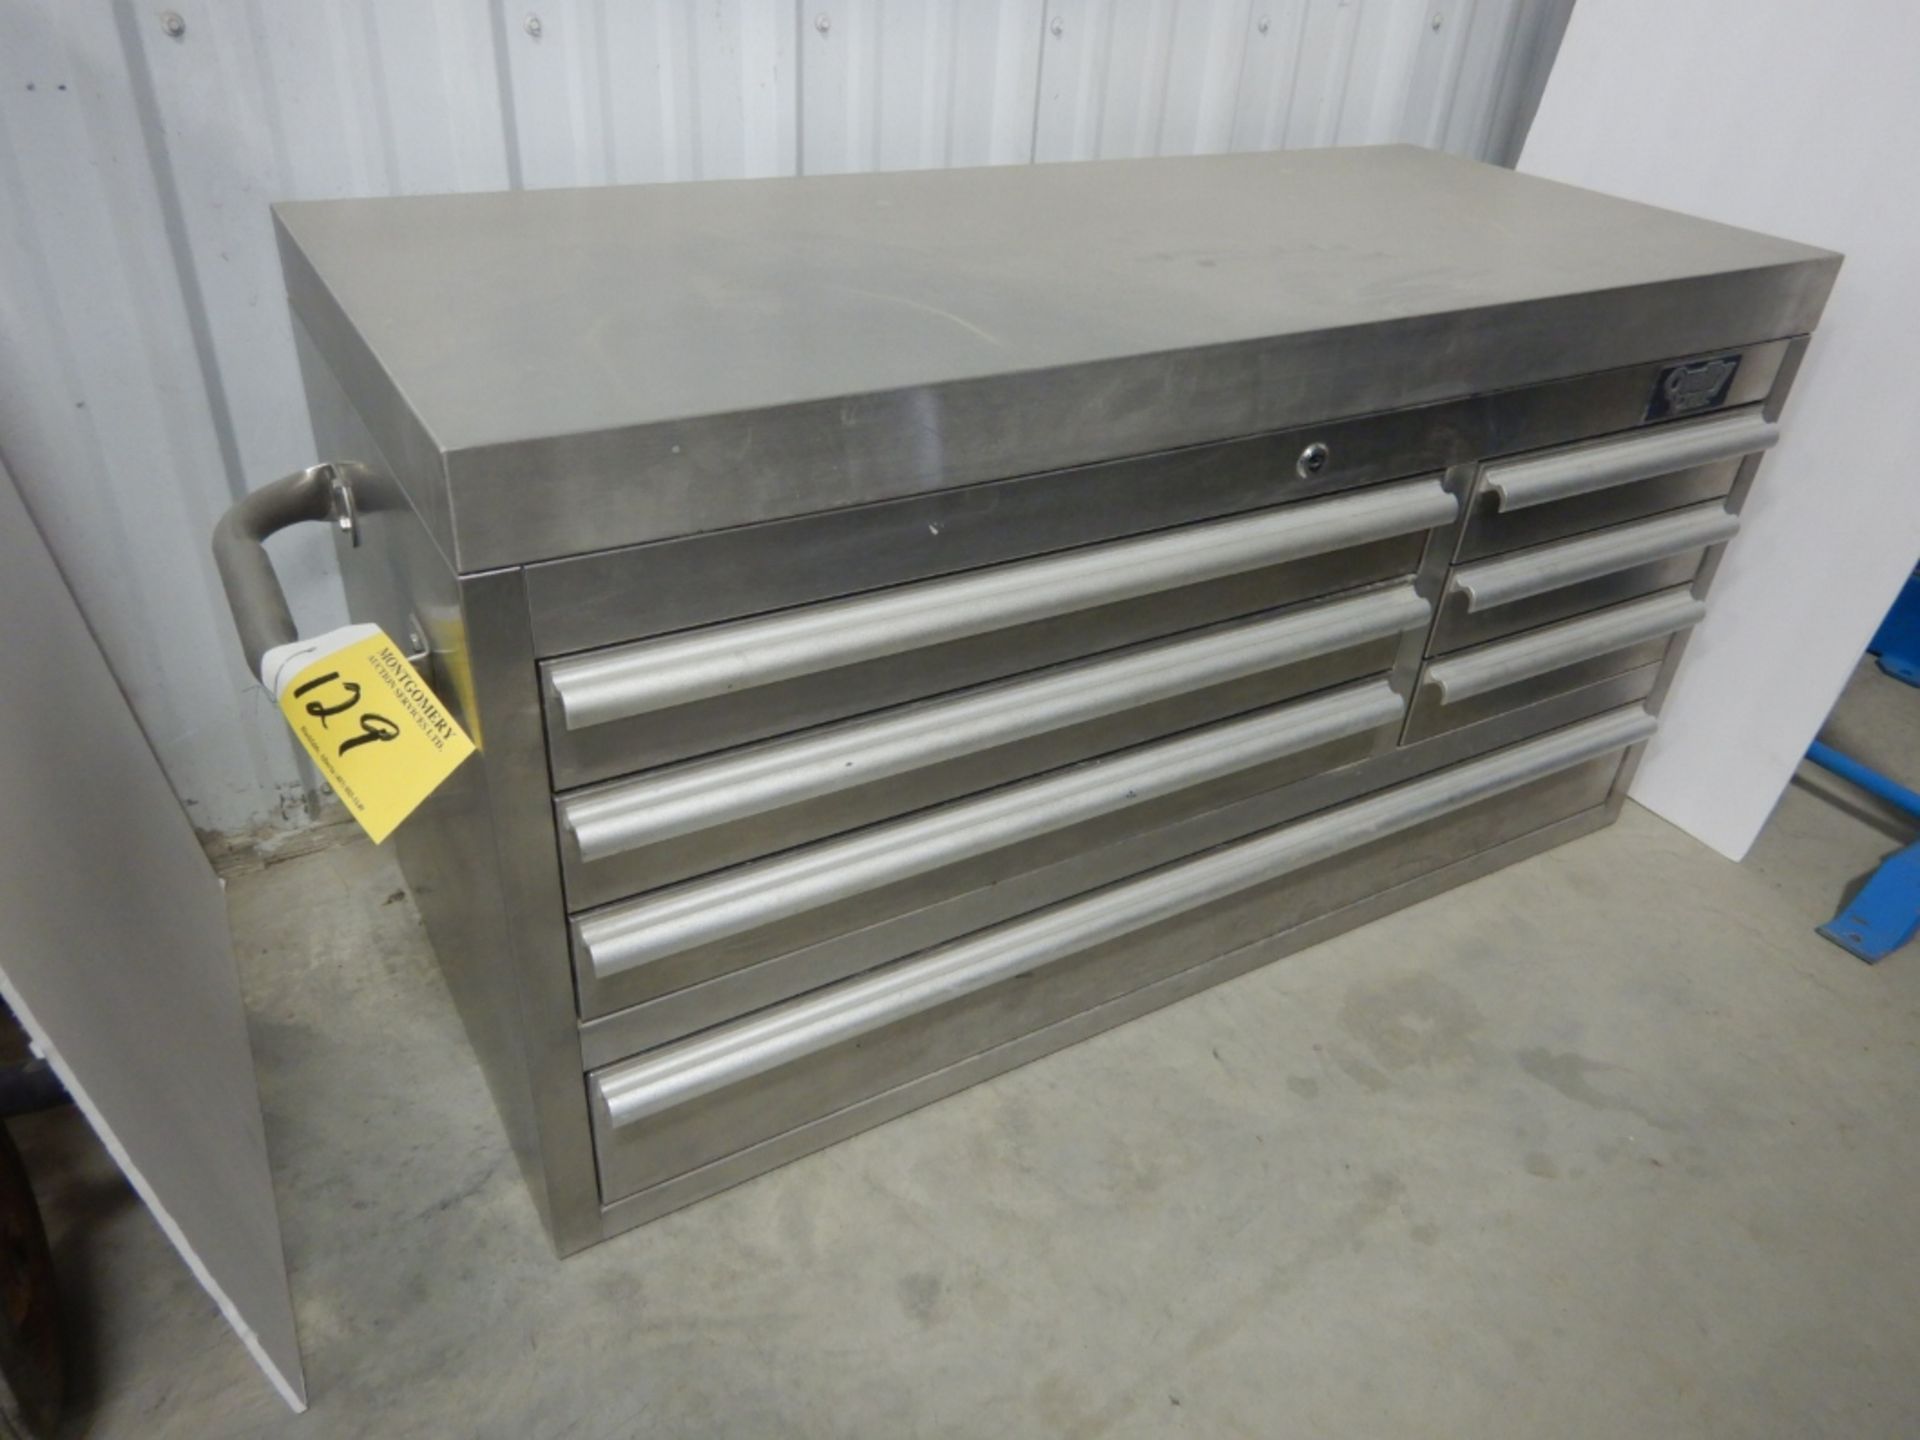 QUALITY-CRAFT STAINLESS 7- DRAWER MECHANICS TOOL CHEST